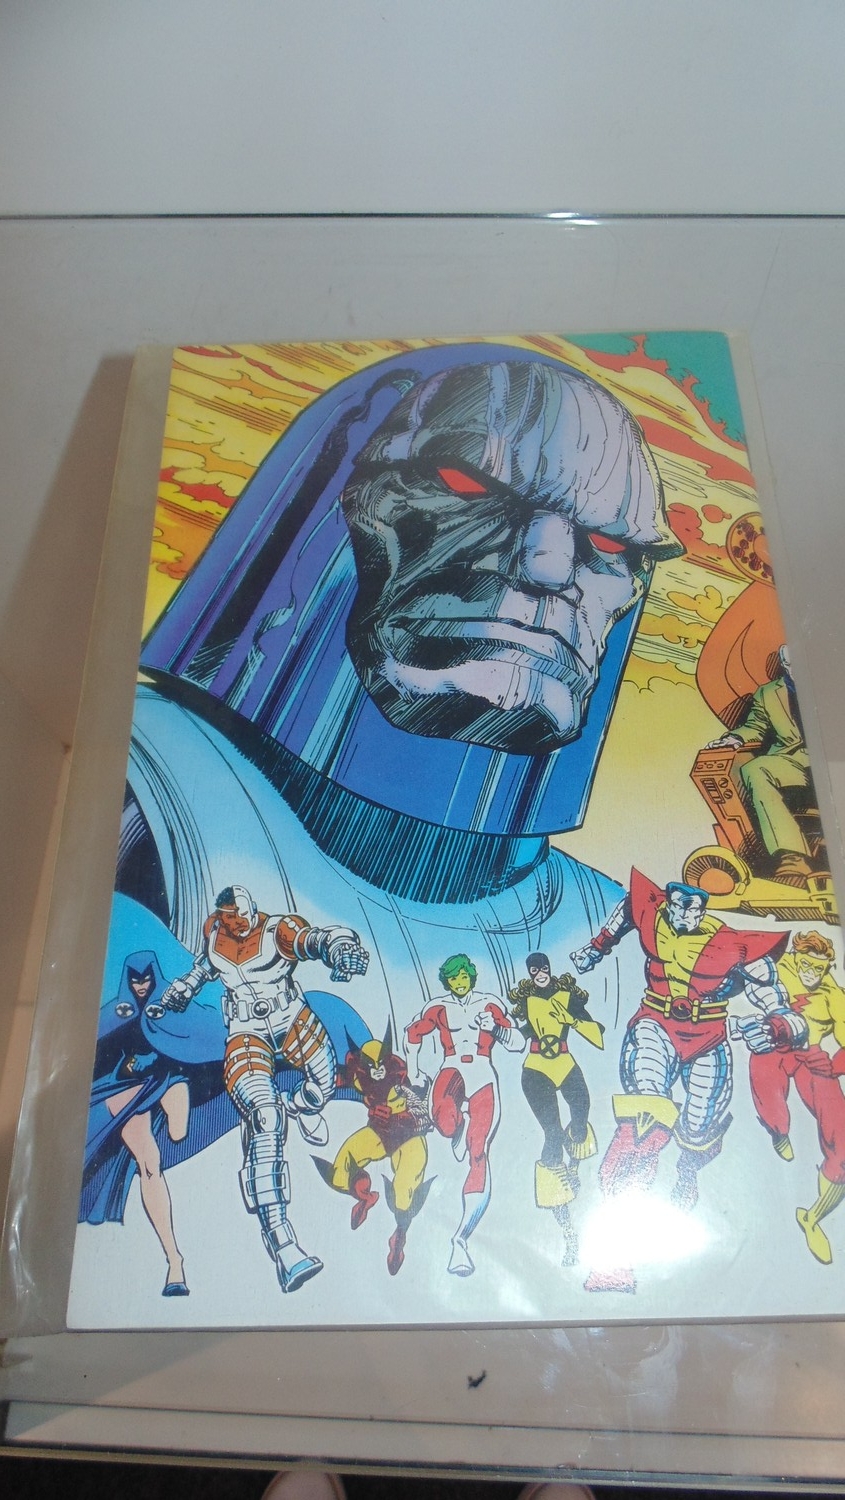 X-Men and the Titans, First edition comic. - Image 2 of 3